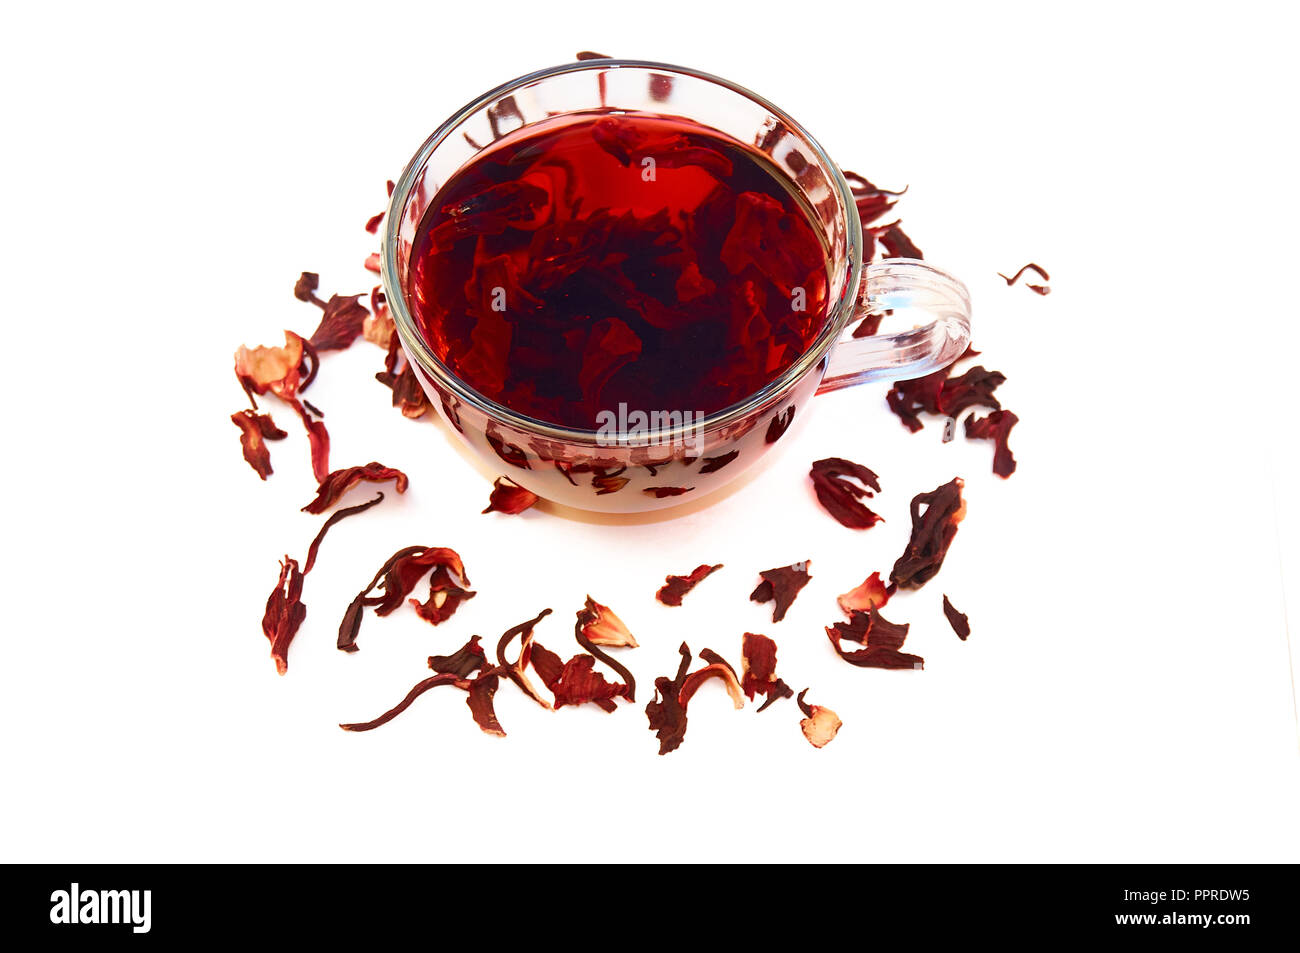 Hibiscus tea in a glass cup on a white background. Stock Photo